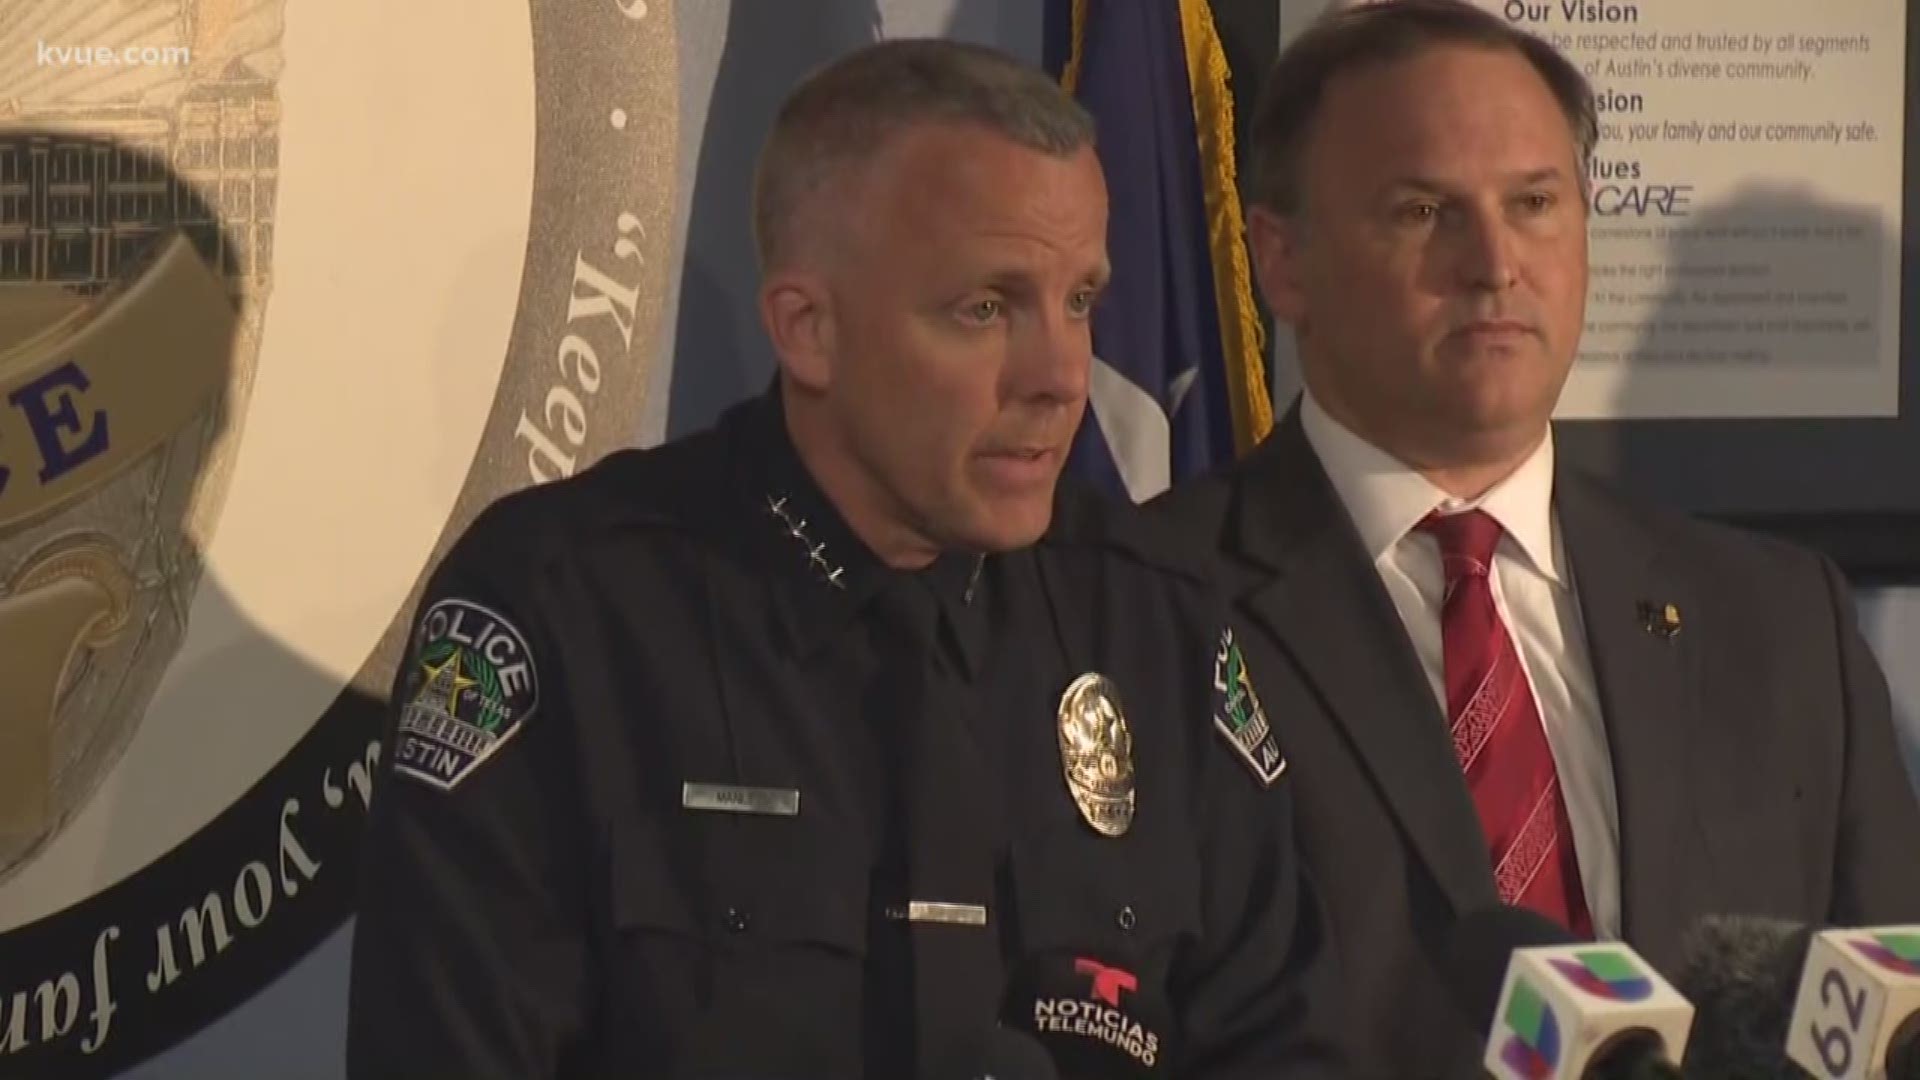 Brian Manley said at a press conference Monday that serving as interim police chief "has been my greatest honor."